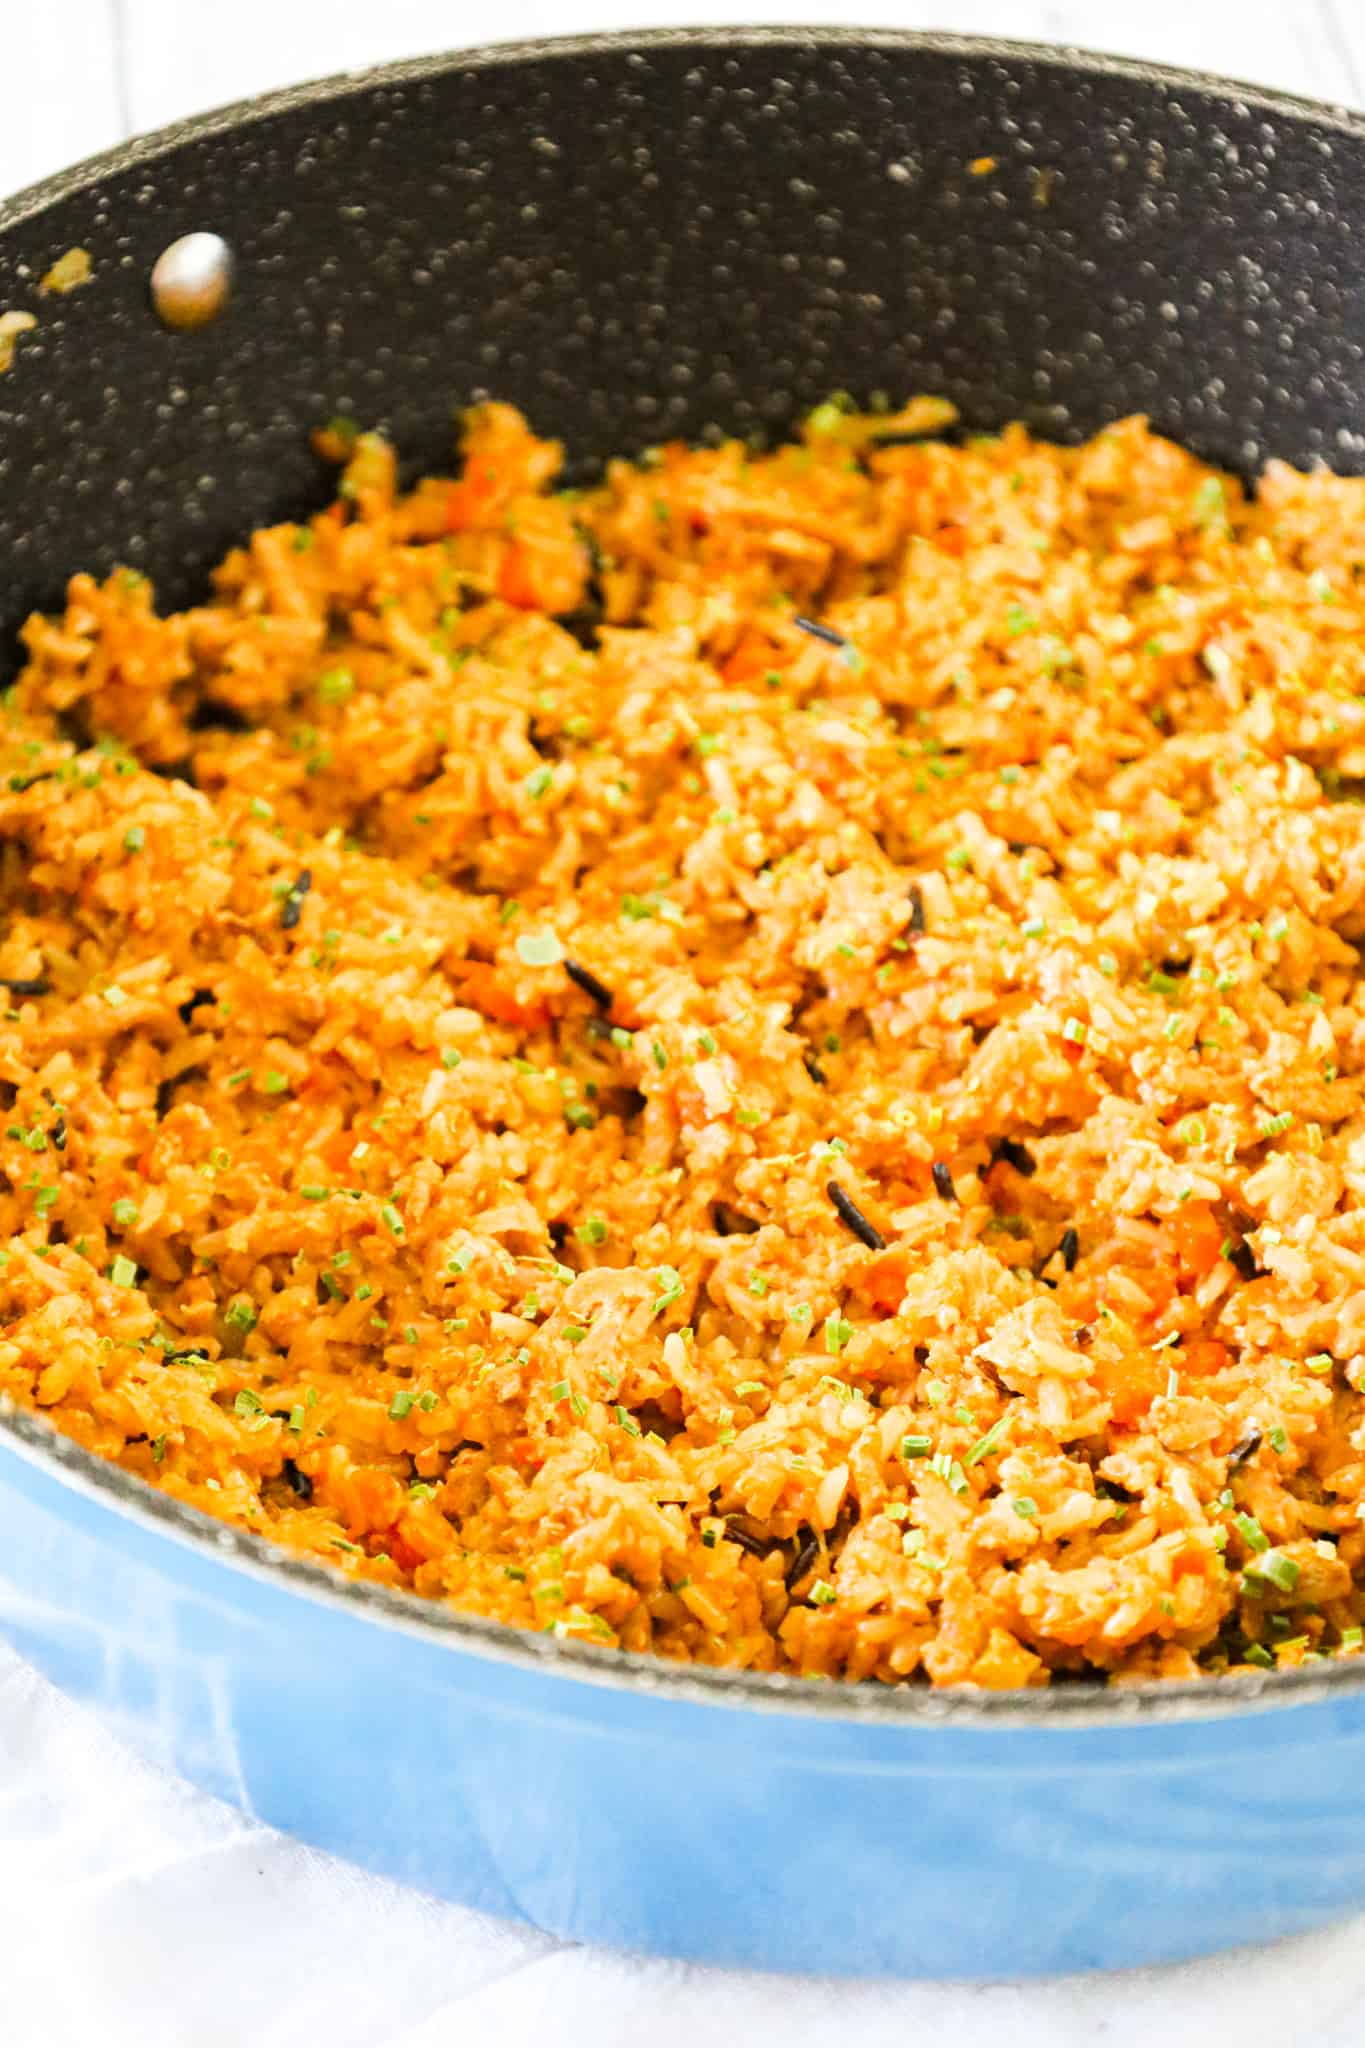 Ground Turkey and Rice is a simple and delicious one pot dinner recipe using brown and wild rice loaded with diced carrots, celery onion and ground turkey cooked in chicken broth and tossed with soy sauce.